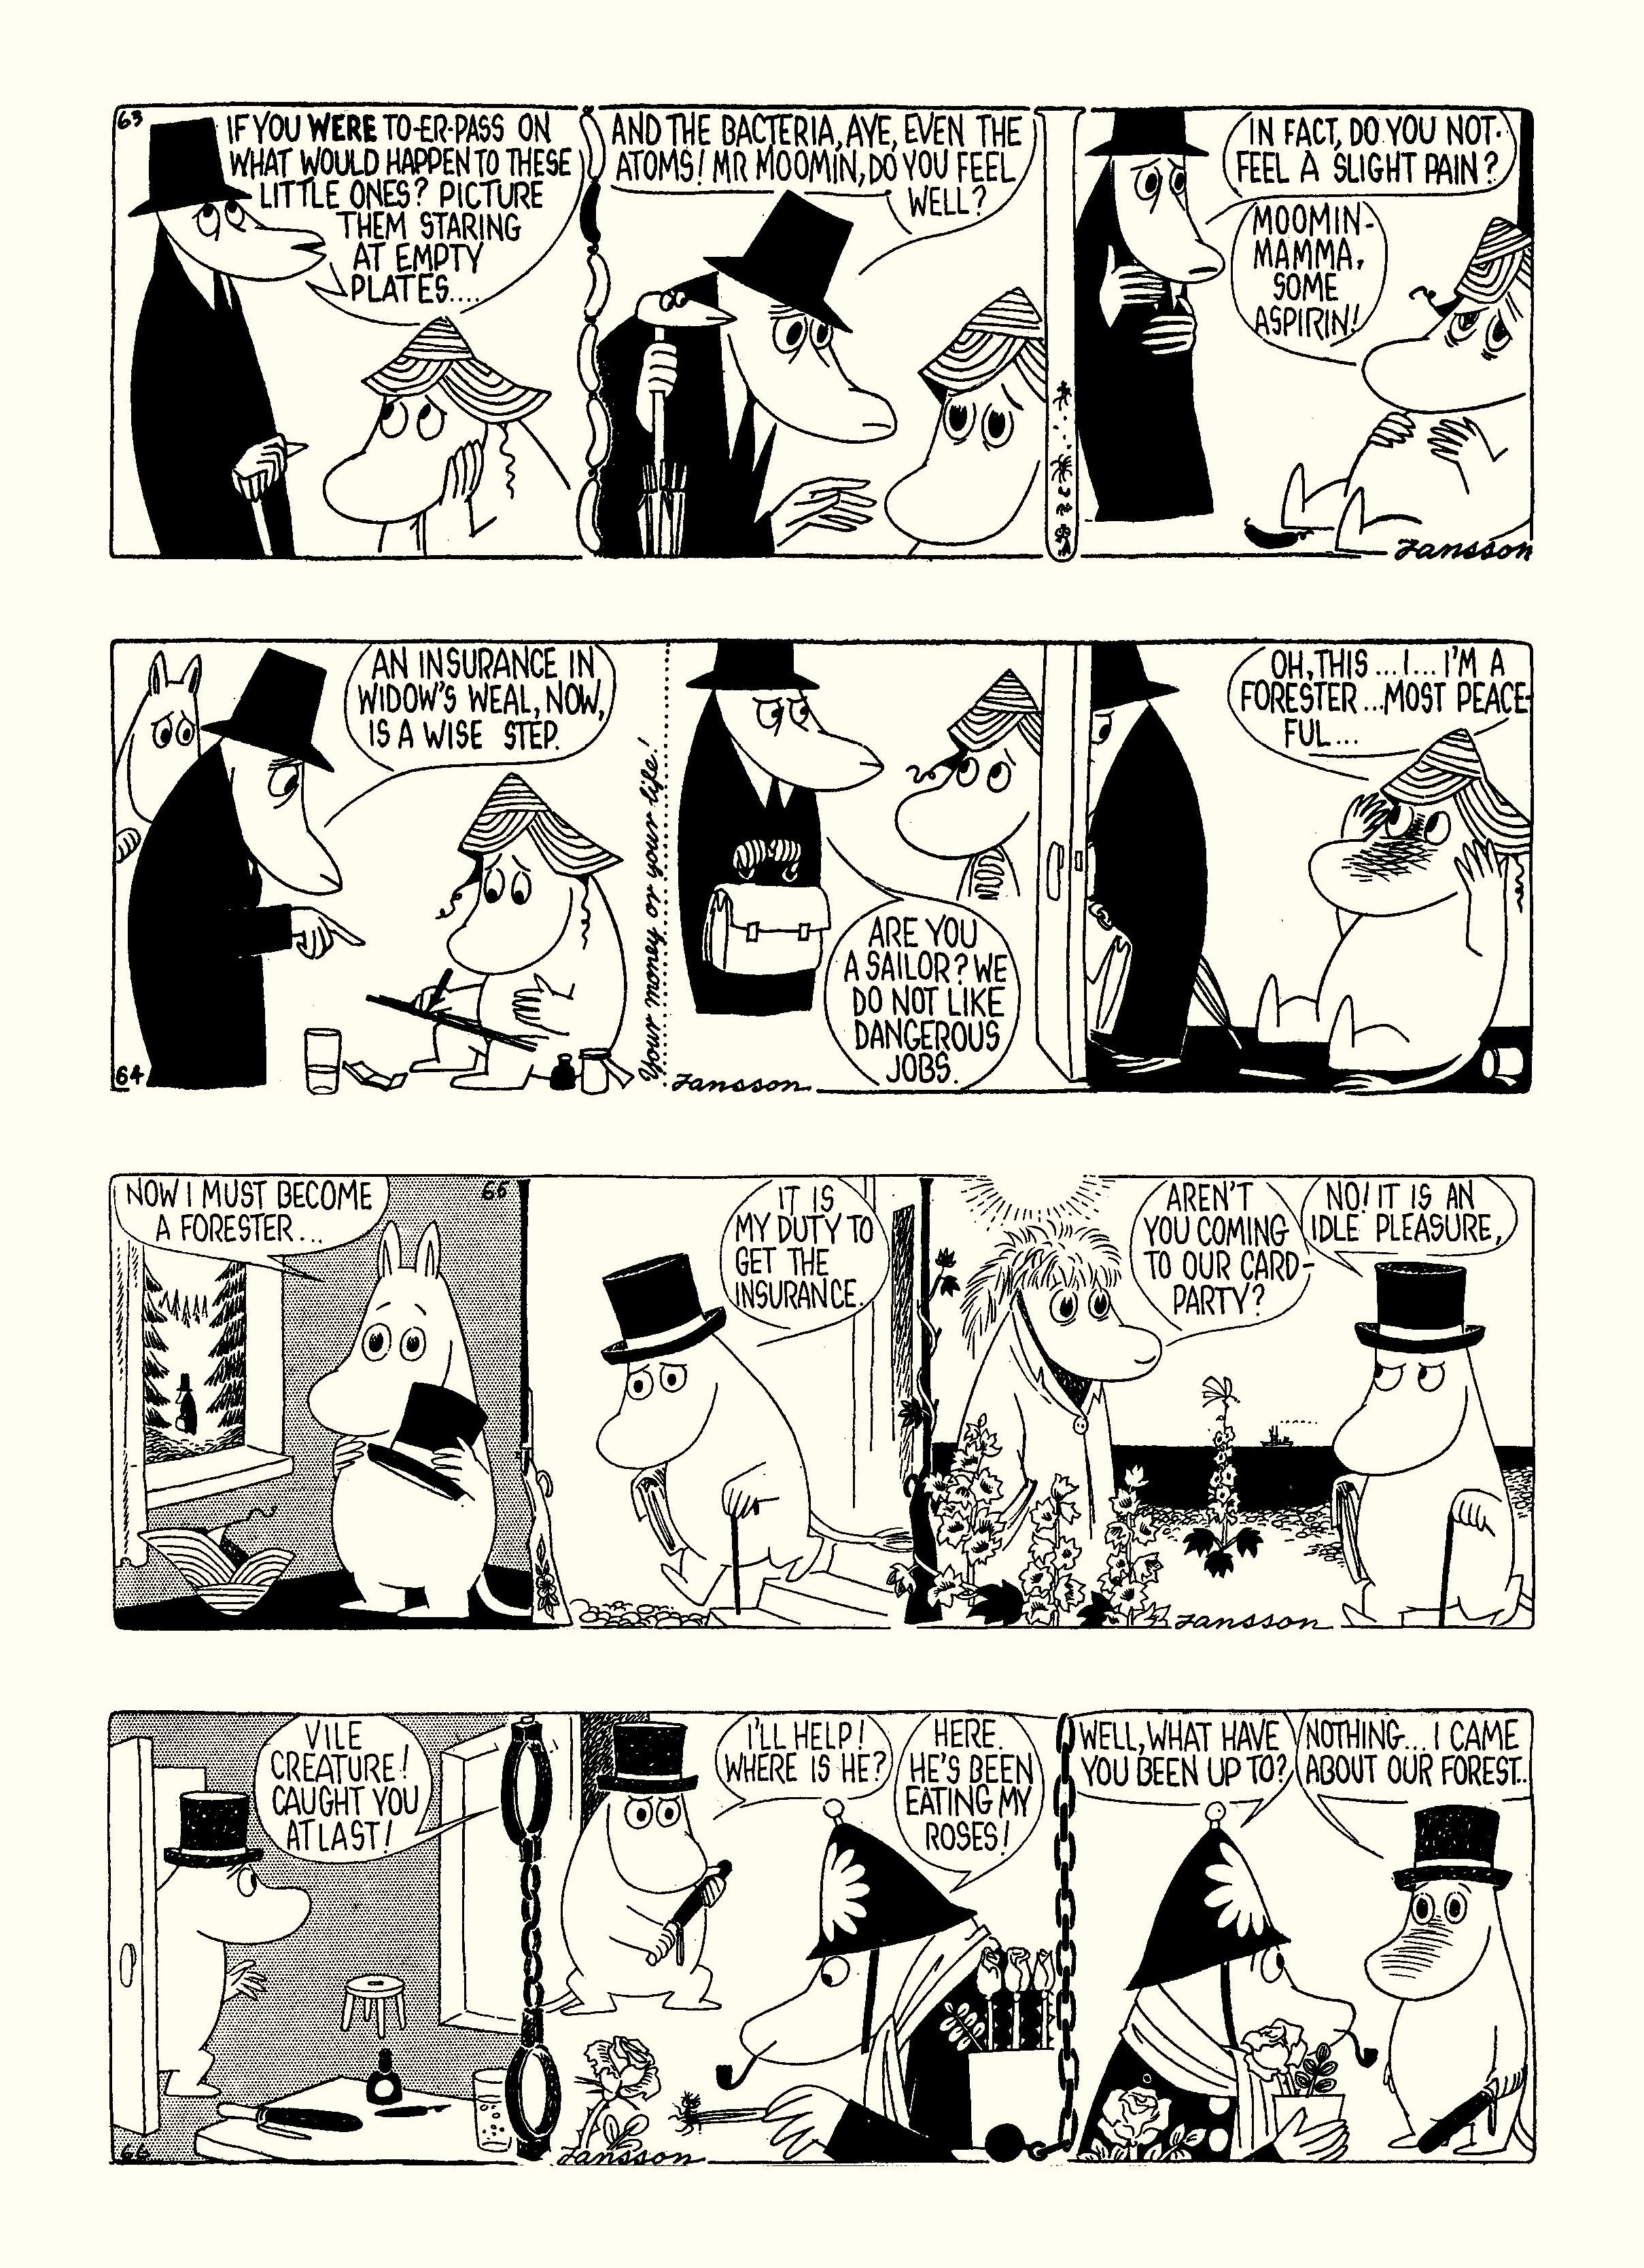 Read online Moomin: The Complete Tove Jansson Comic Strip comic -  Issue # TPB 4 - 53